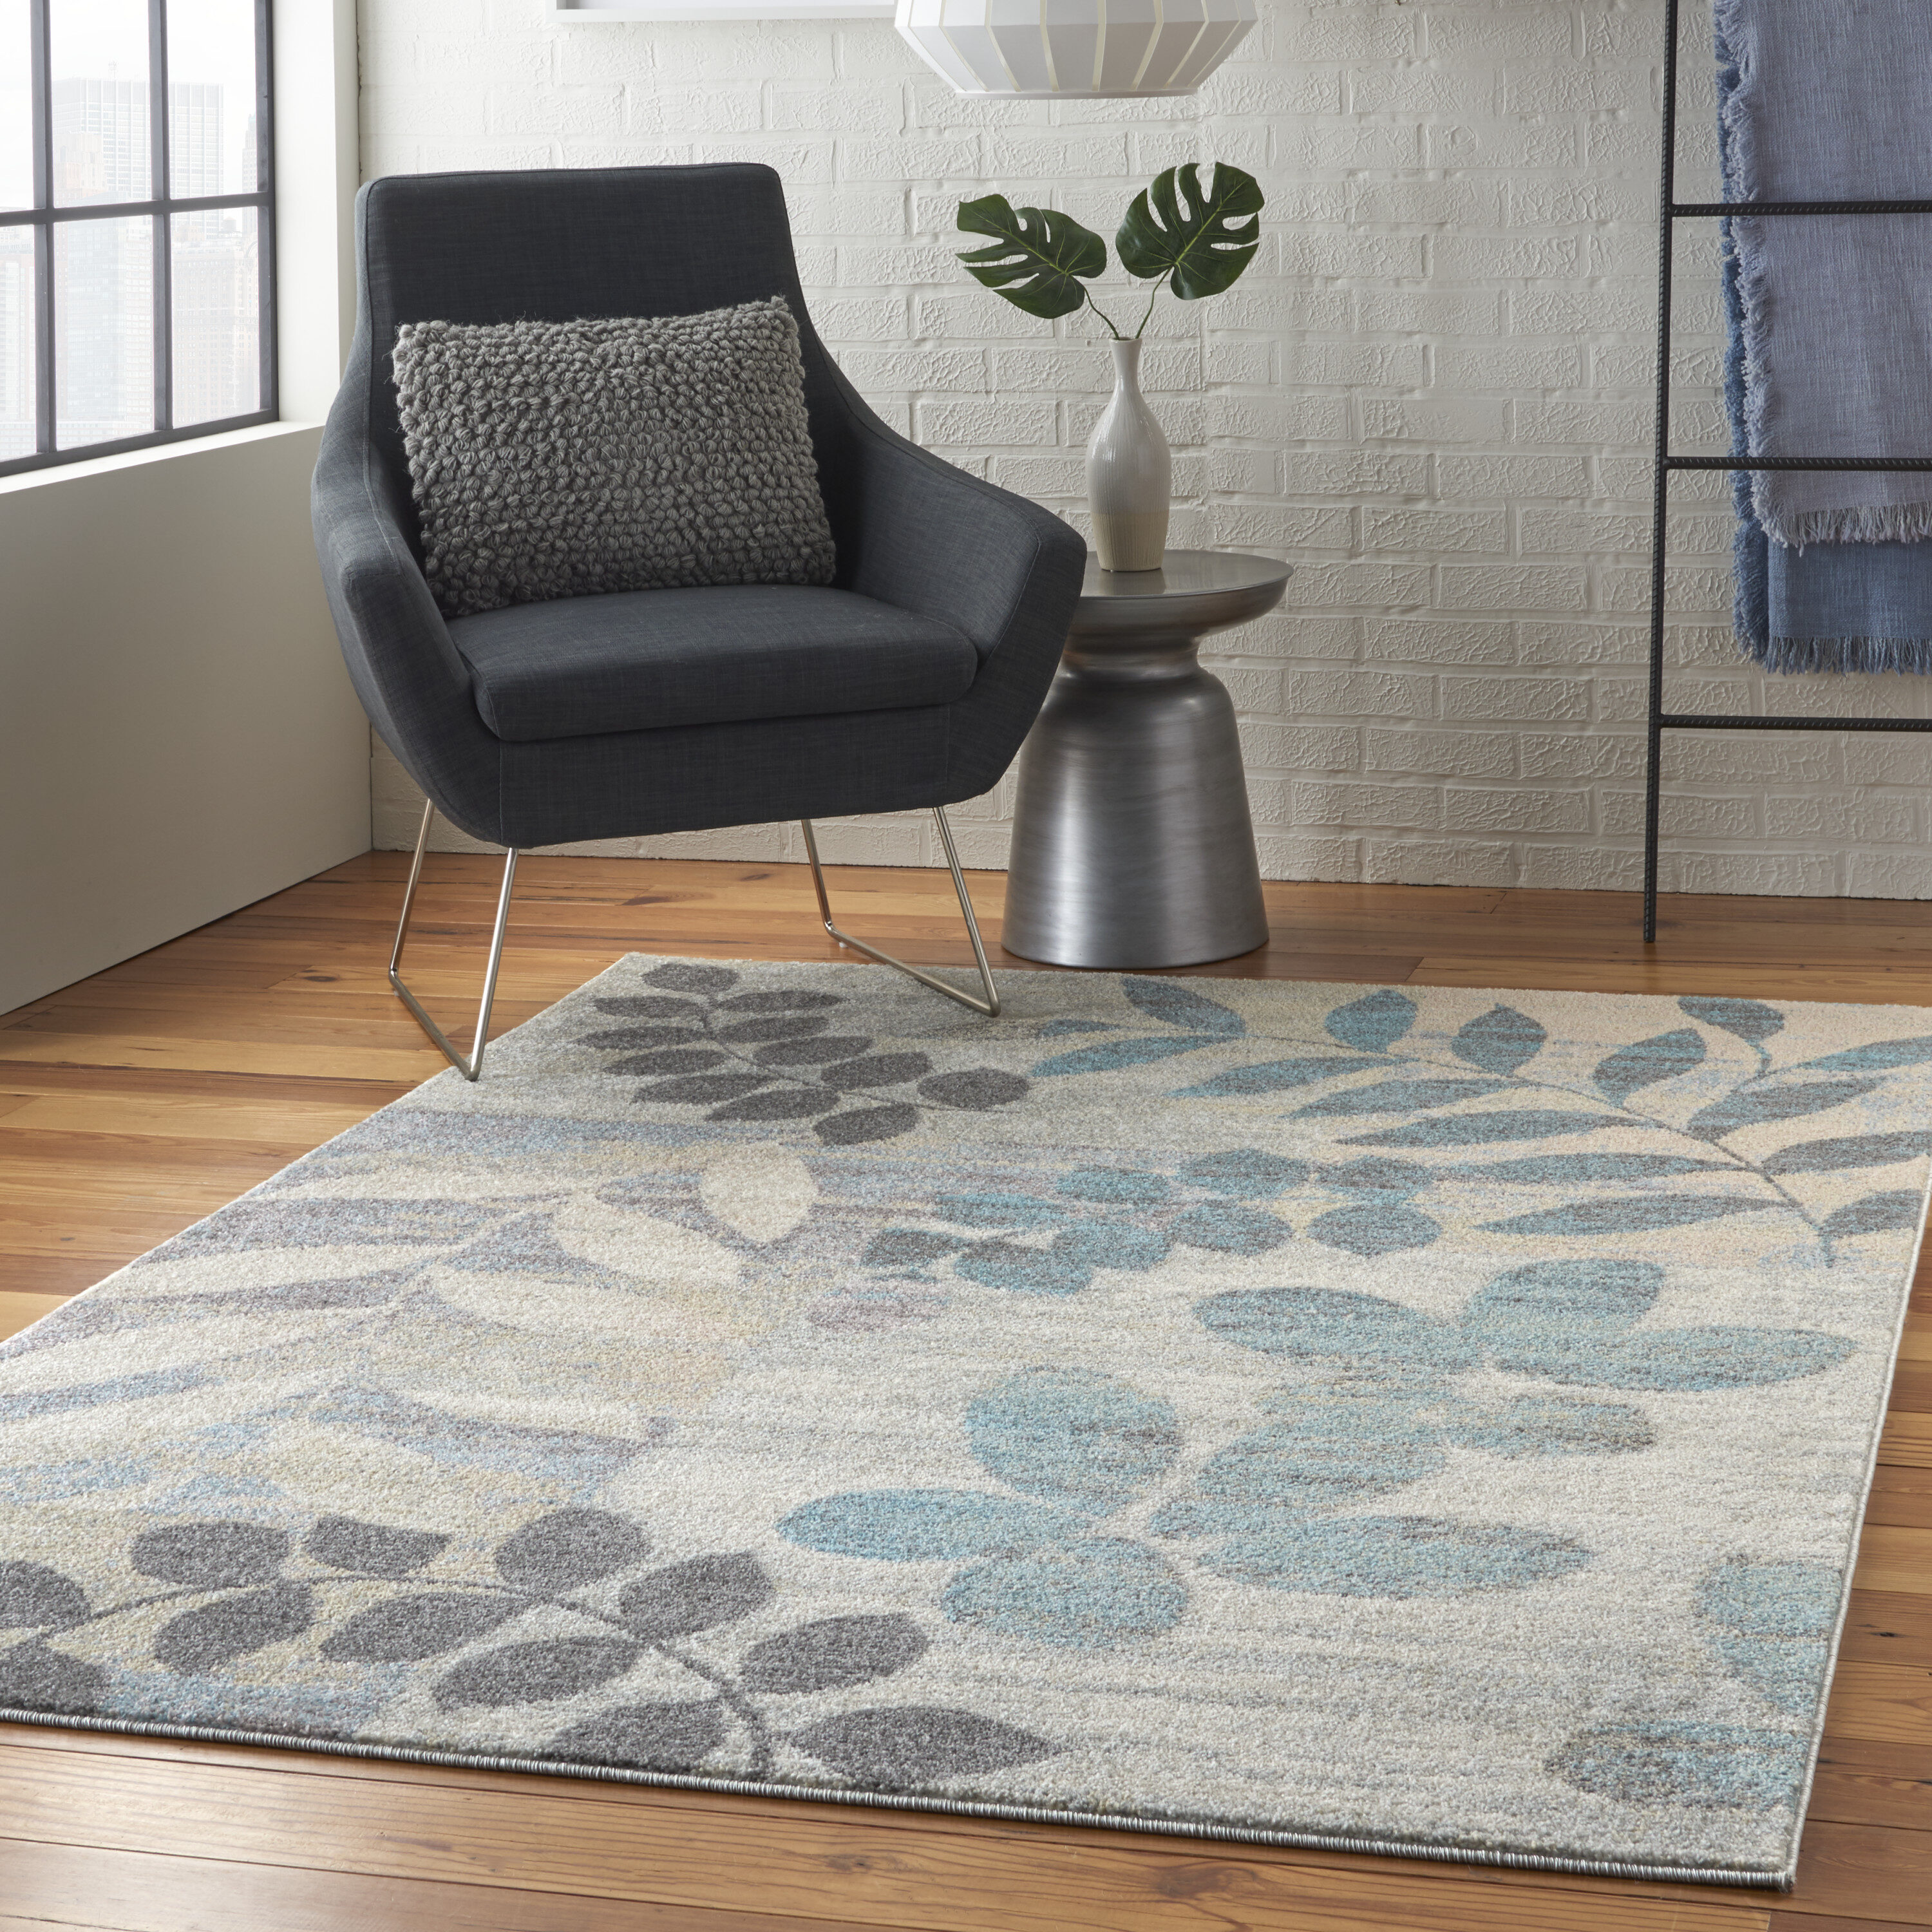 Addison Rugs Cozy Winter 1 ft. 8 in. x 2 ft. 6 in. Blue Indoor